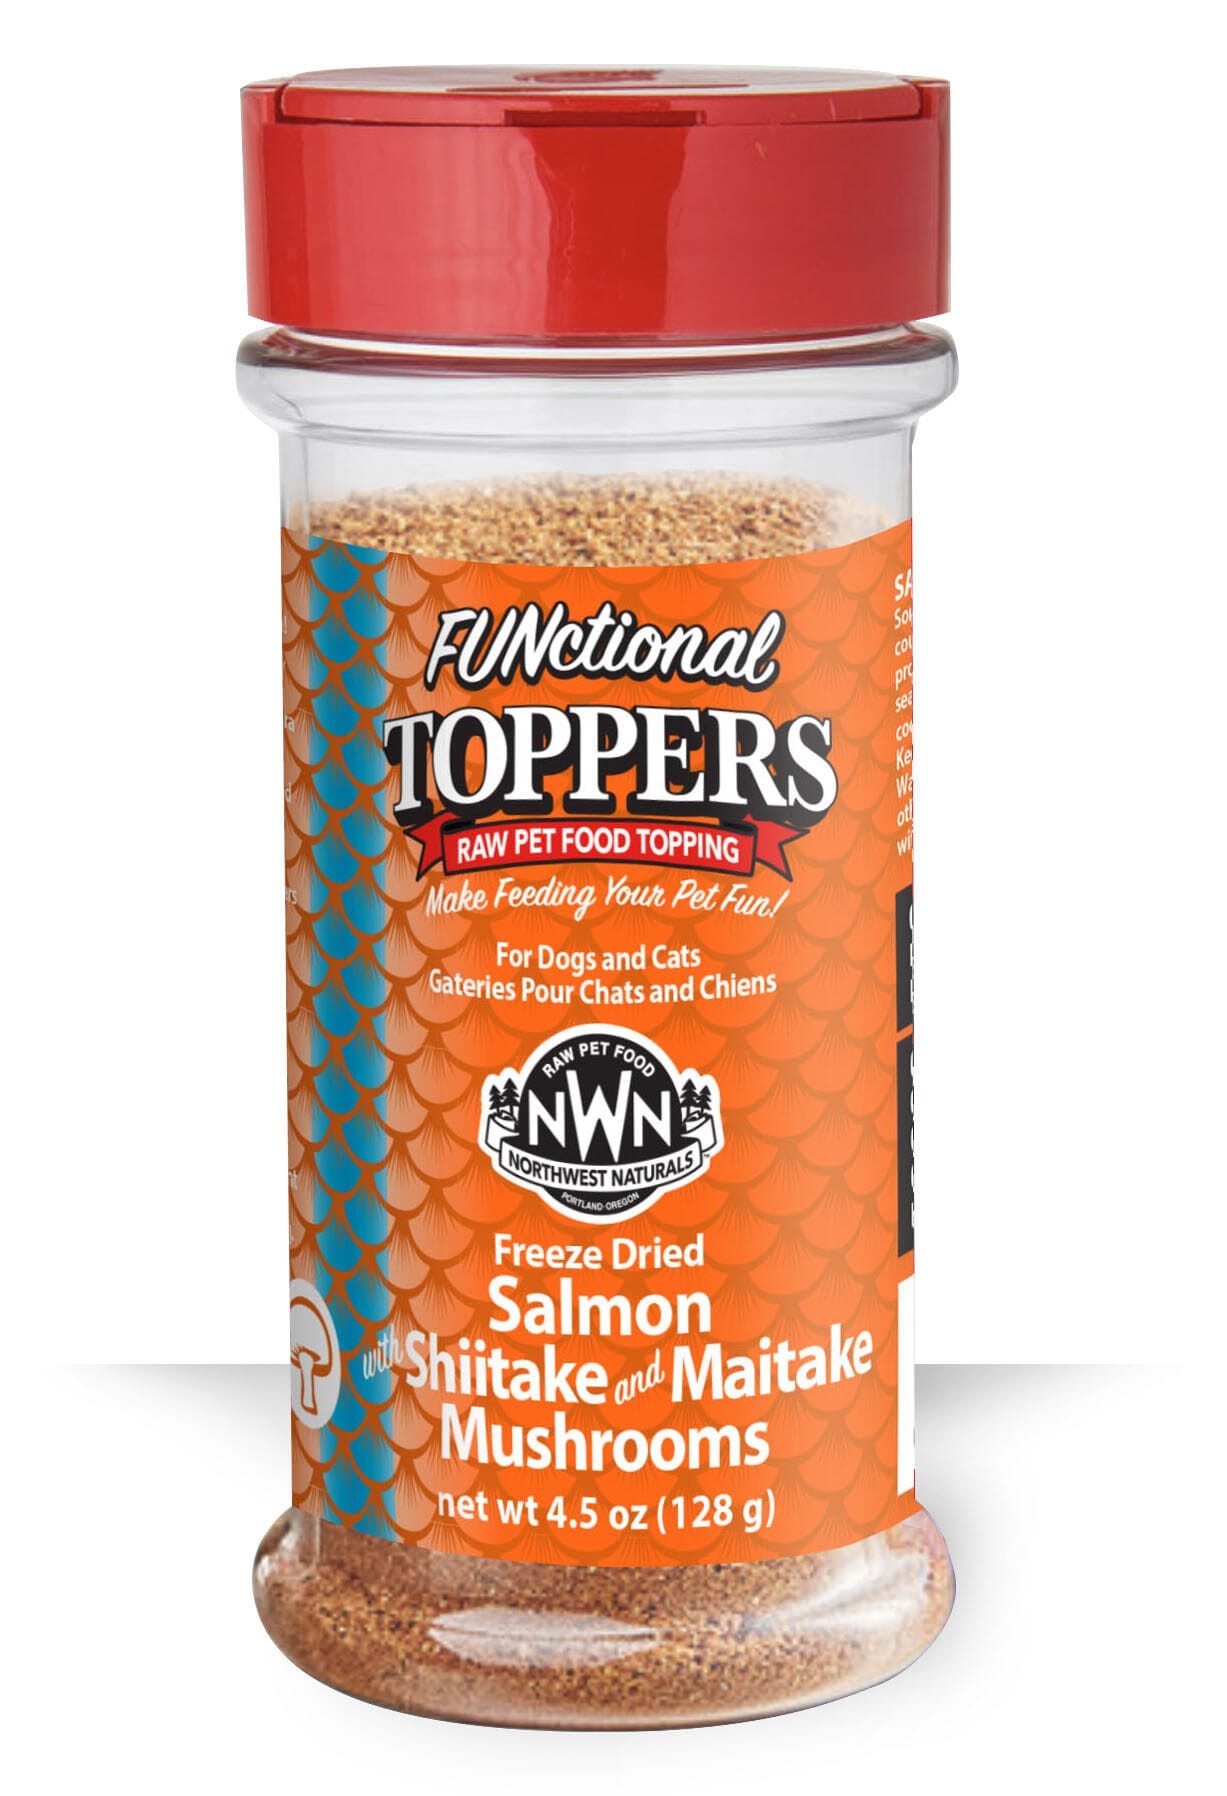 Northwest Naturals Salmon with Shitake & Miatake Mushrooms Cat and Dog Food Toppers - 4.5 Oz Bottle  